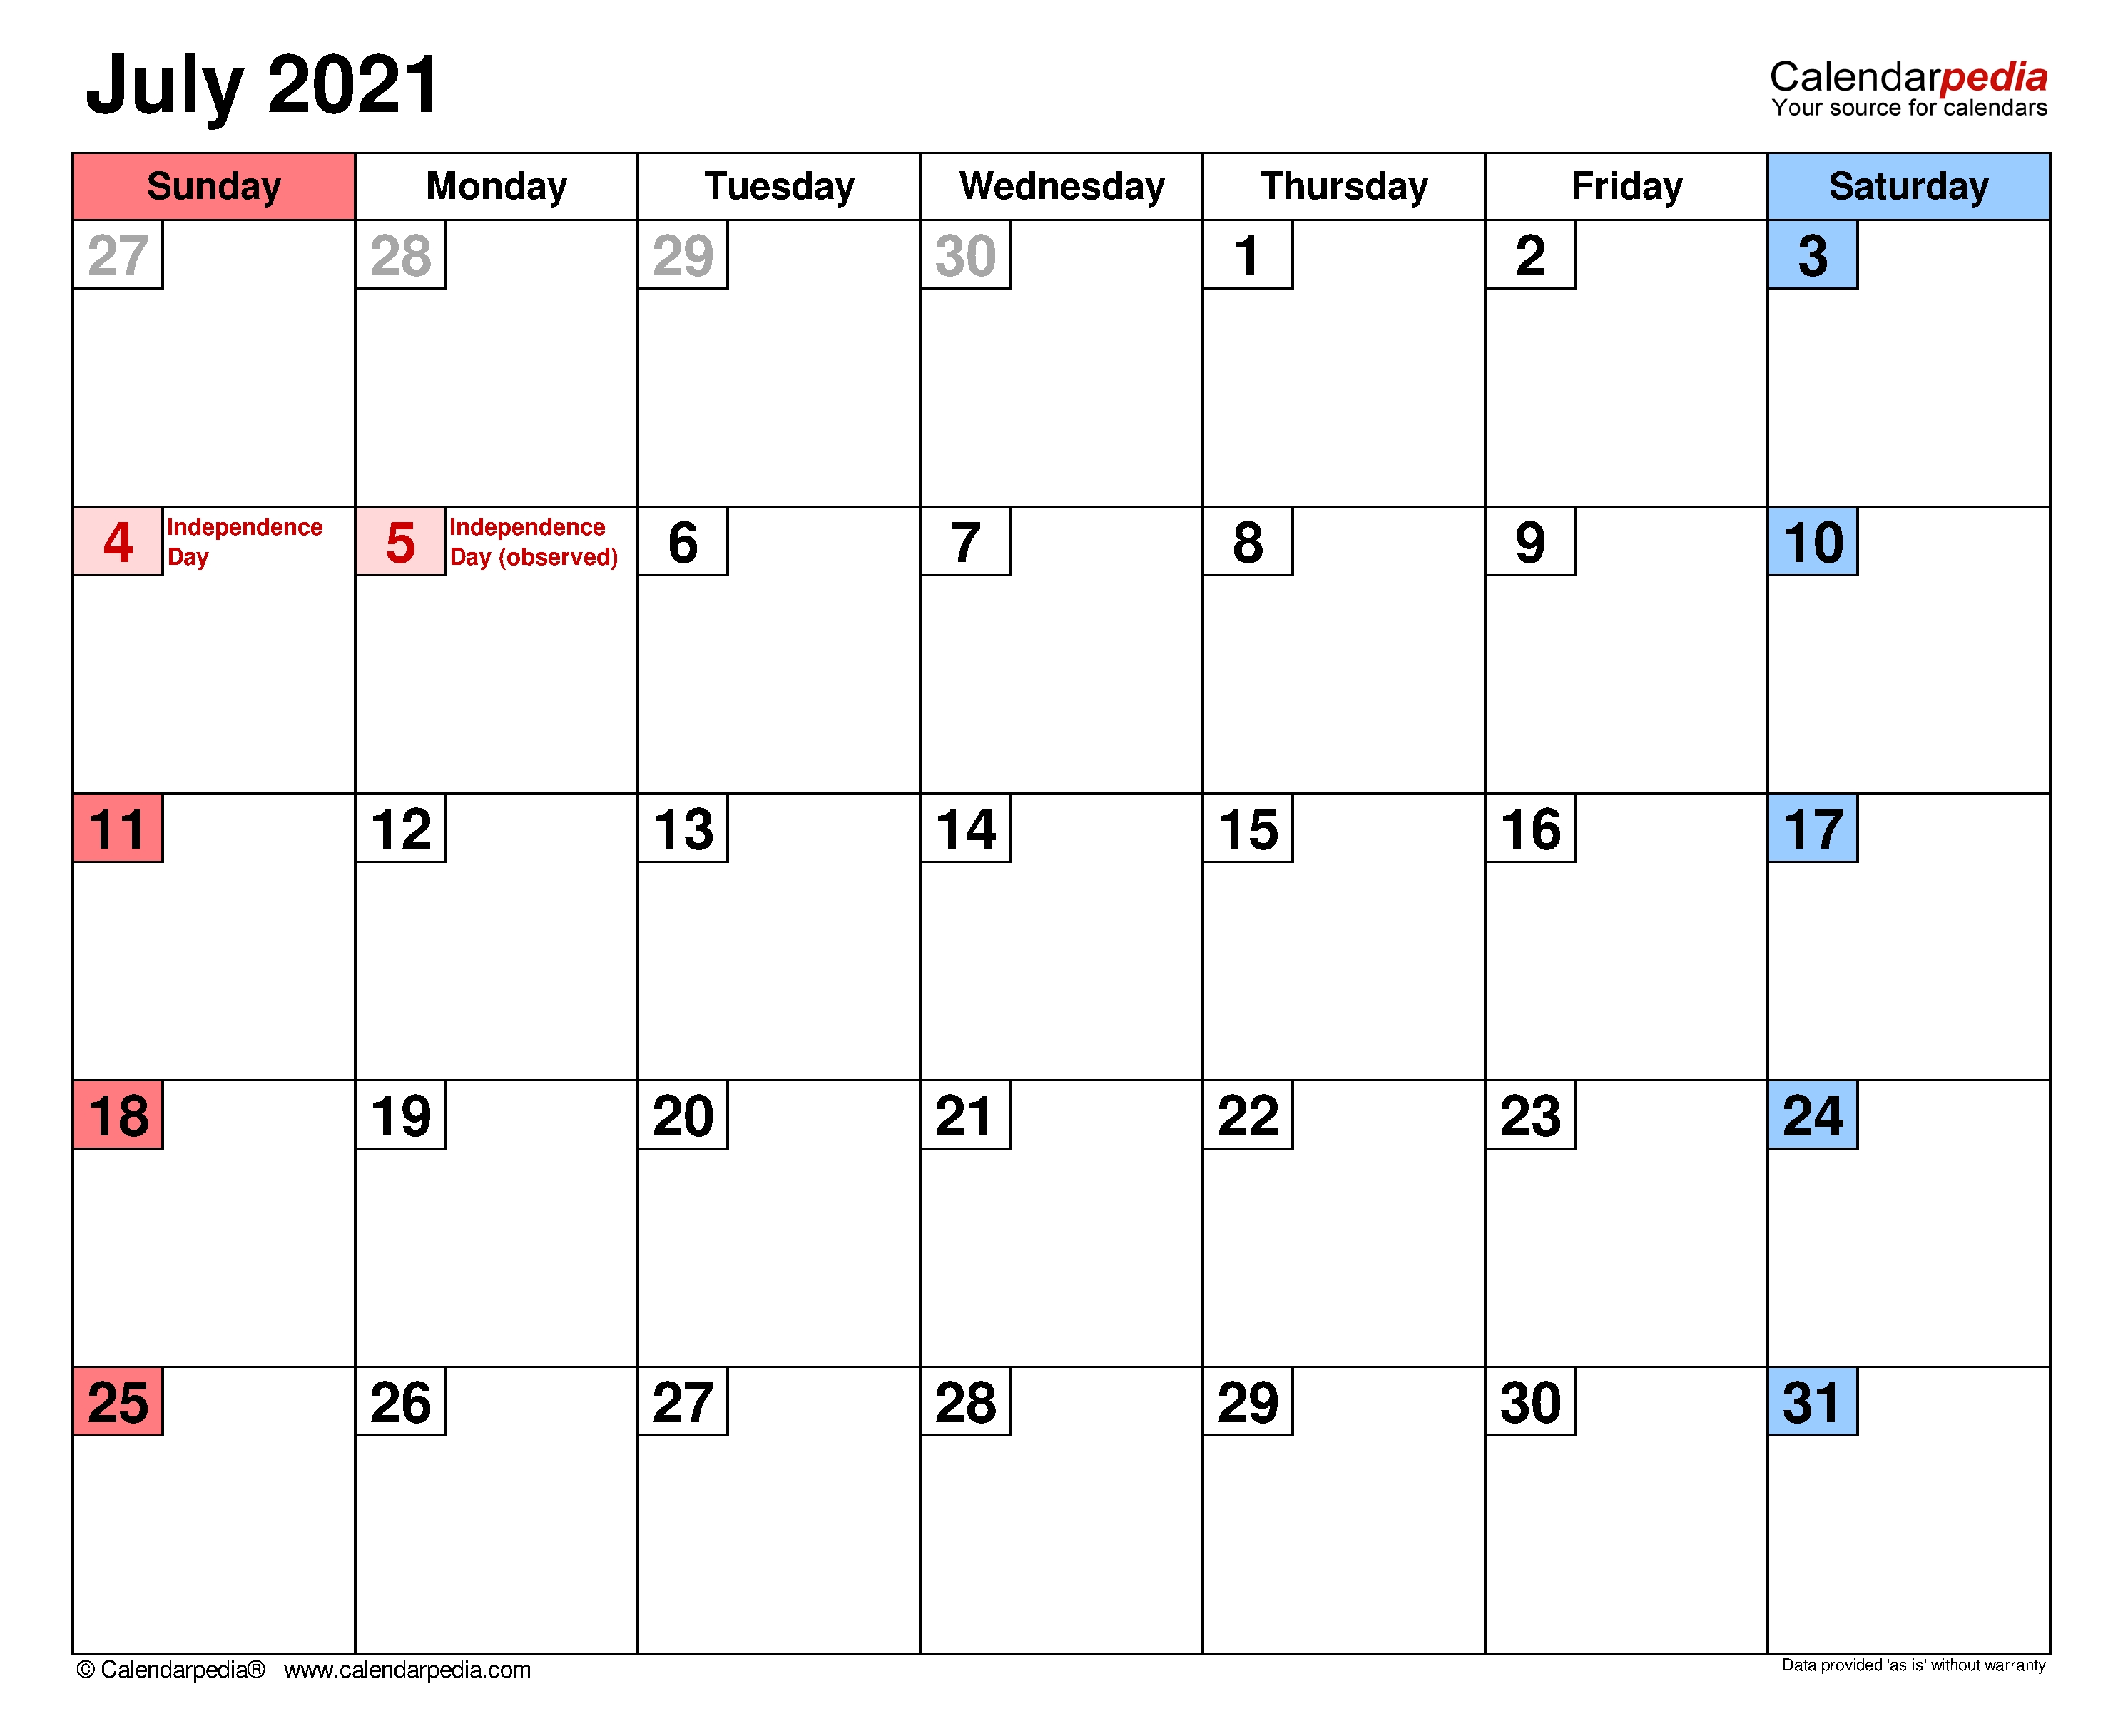 July 2021 Calendar | Templates For Word, Excel And Pdf July 2021 Calendar Editable